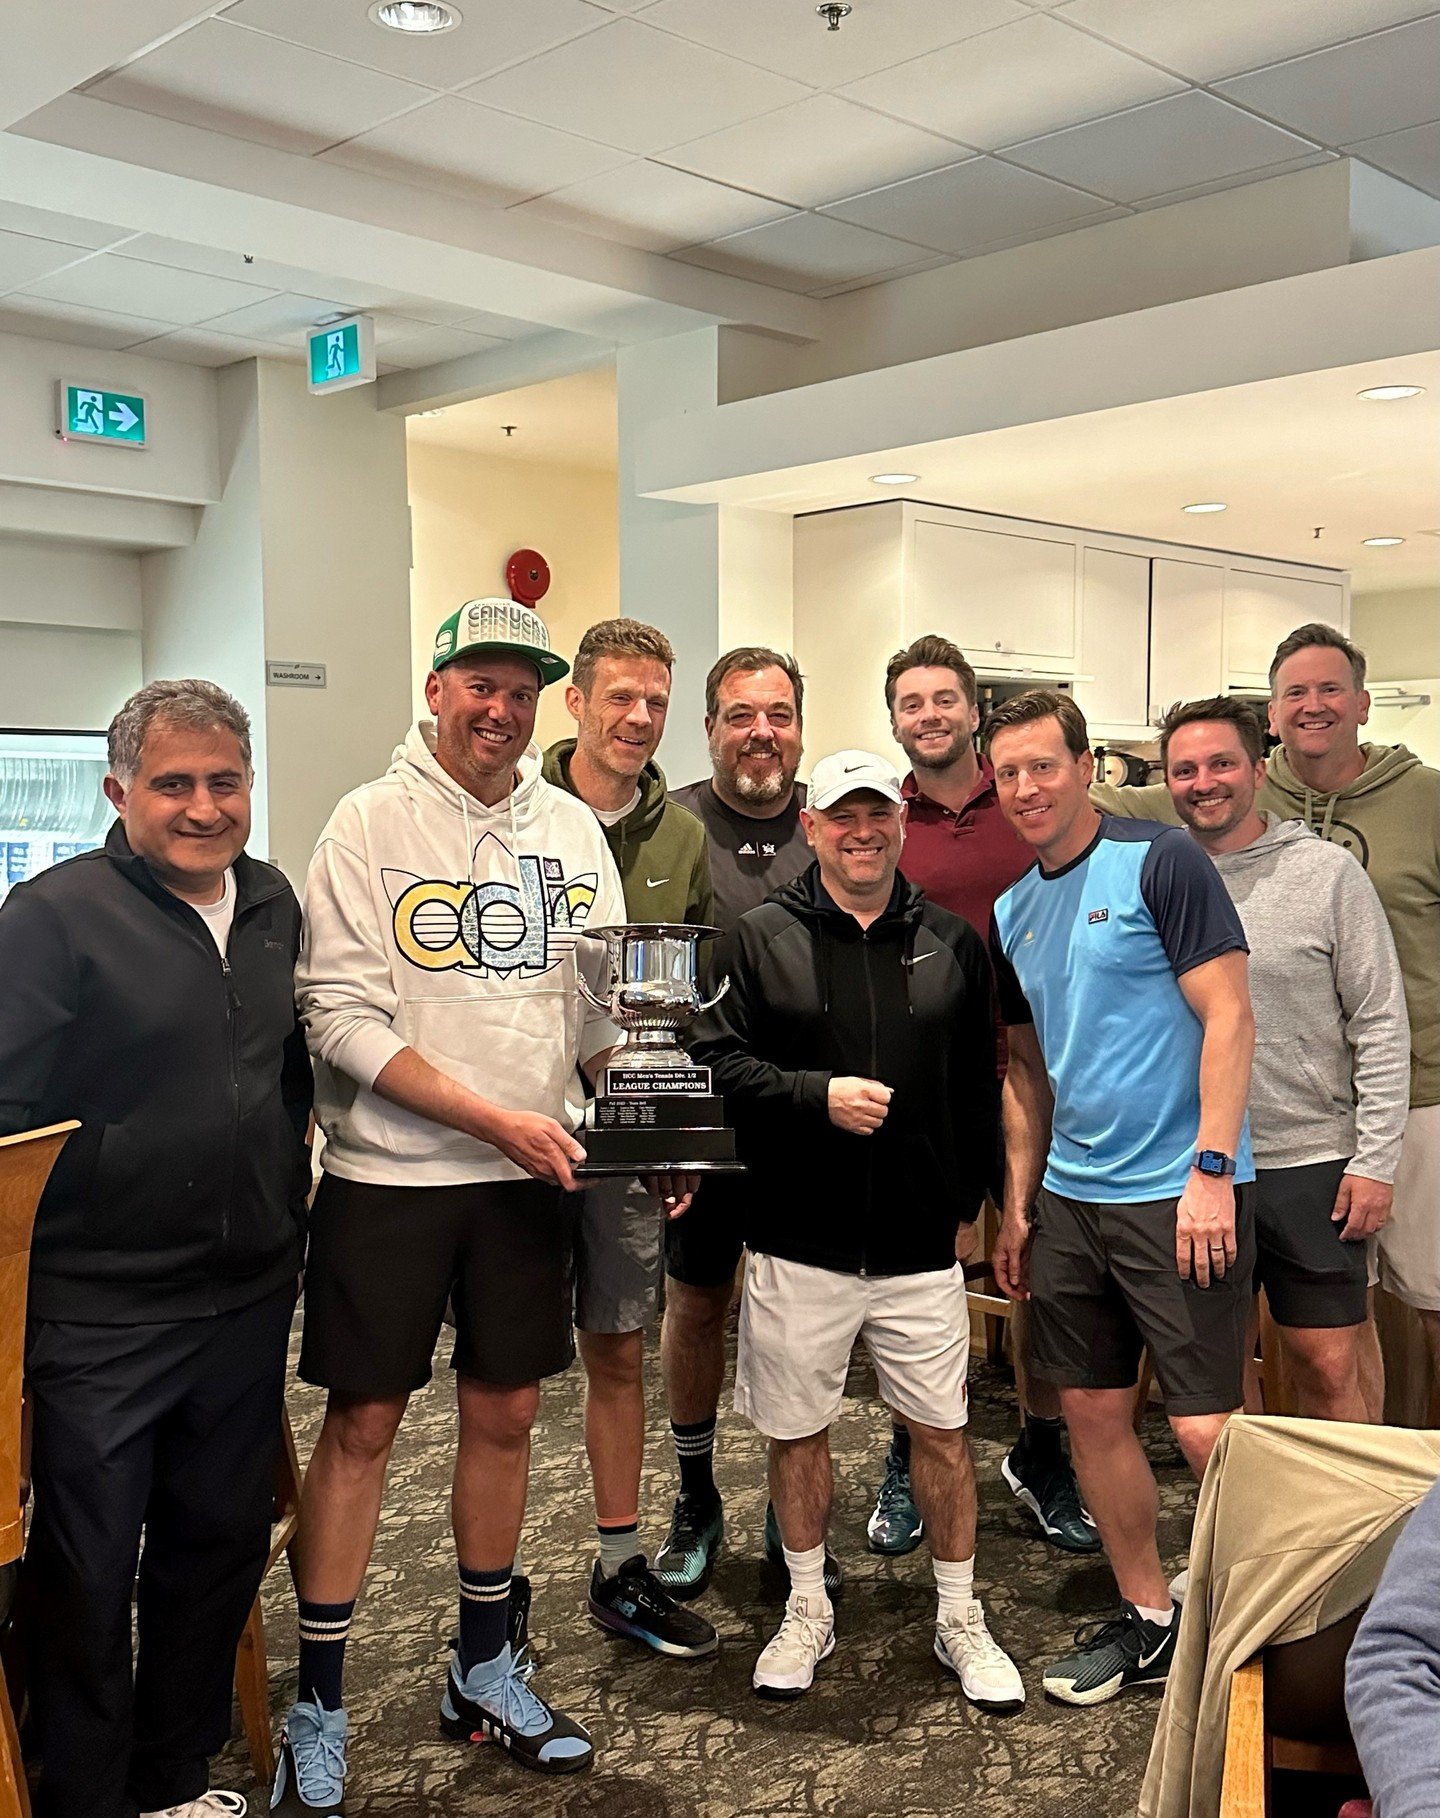 Men&rsquo;s Div 1 &amp; 2 Winter season wrapped up with Team Bell taking the title in a deciding tiebreaker after a 3-3 split match result in the final. Another competitive season with some impressive tennis!
.
.
#tenniscanada #tennispro #hollyburnco